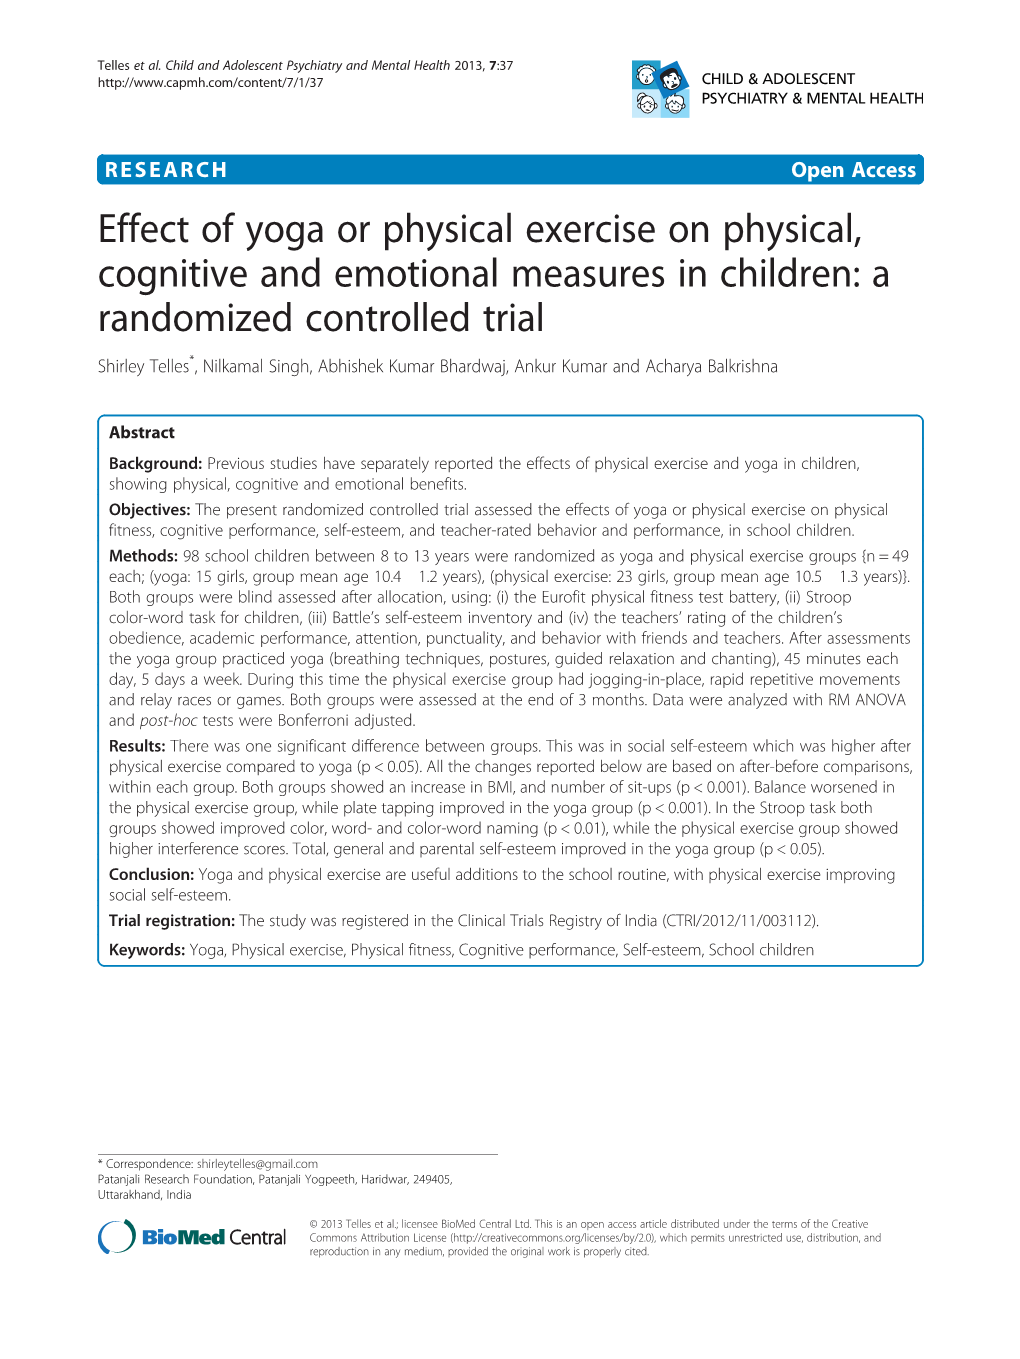 Effect of Yoga Or Physical Exercise on Physical, Cognitive and Emotional